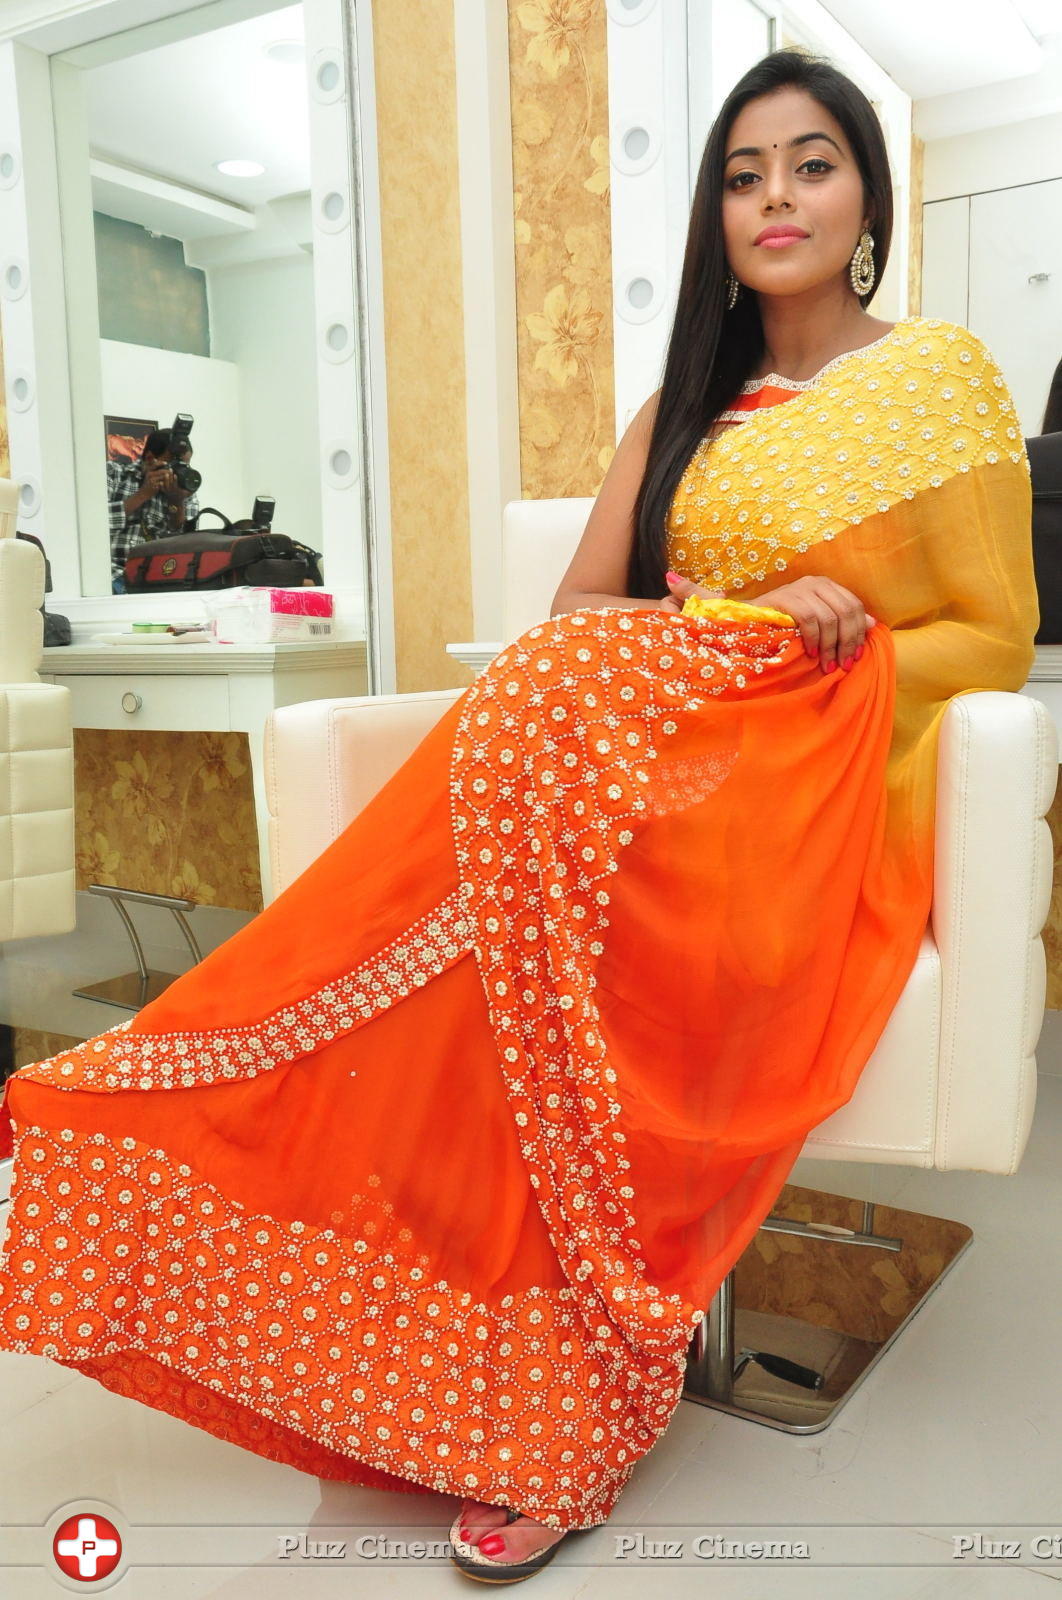 Poorna - Poorna Launches Naturals Beauty Salon Photos | Picture 1258851